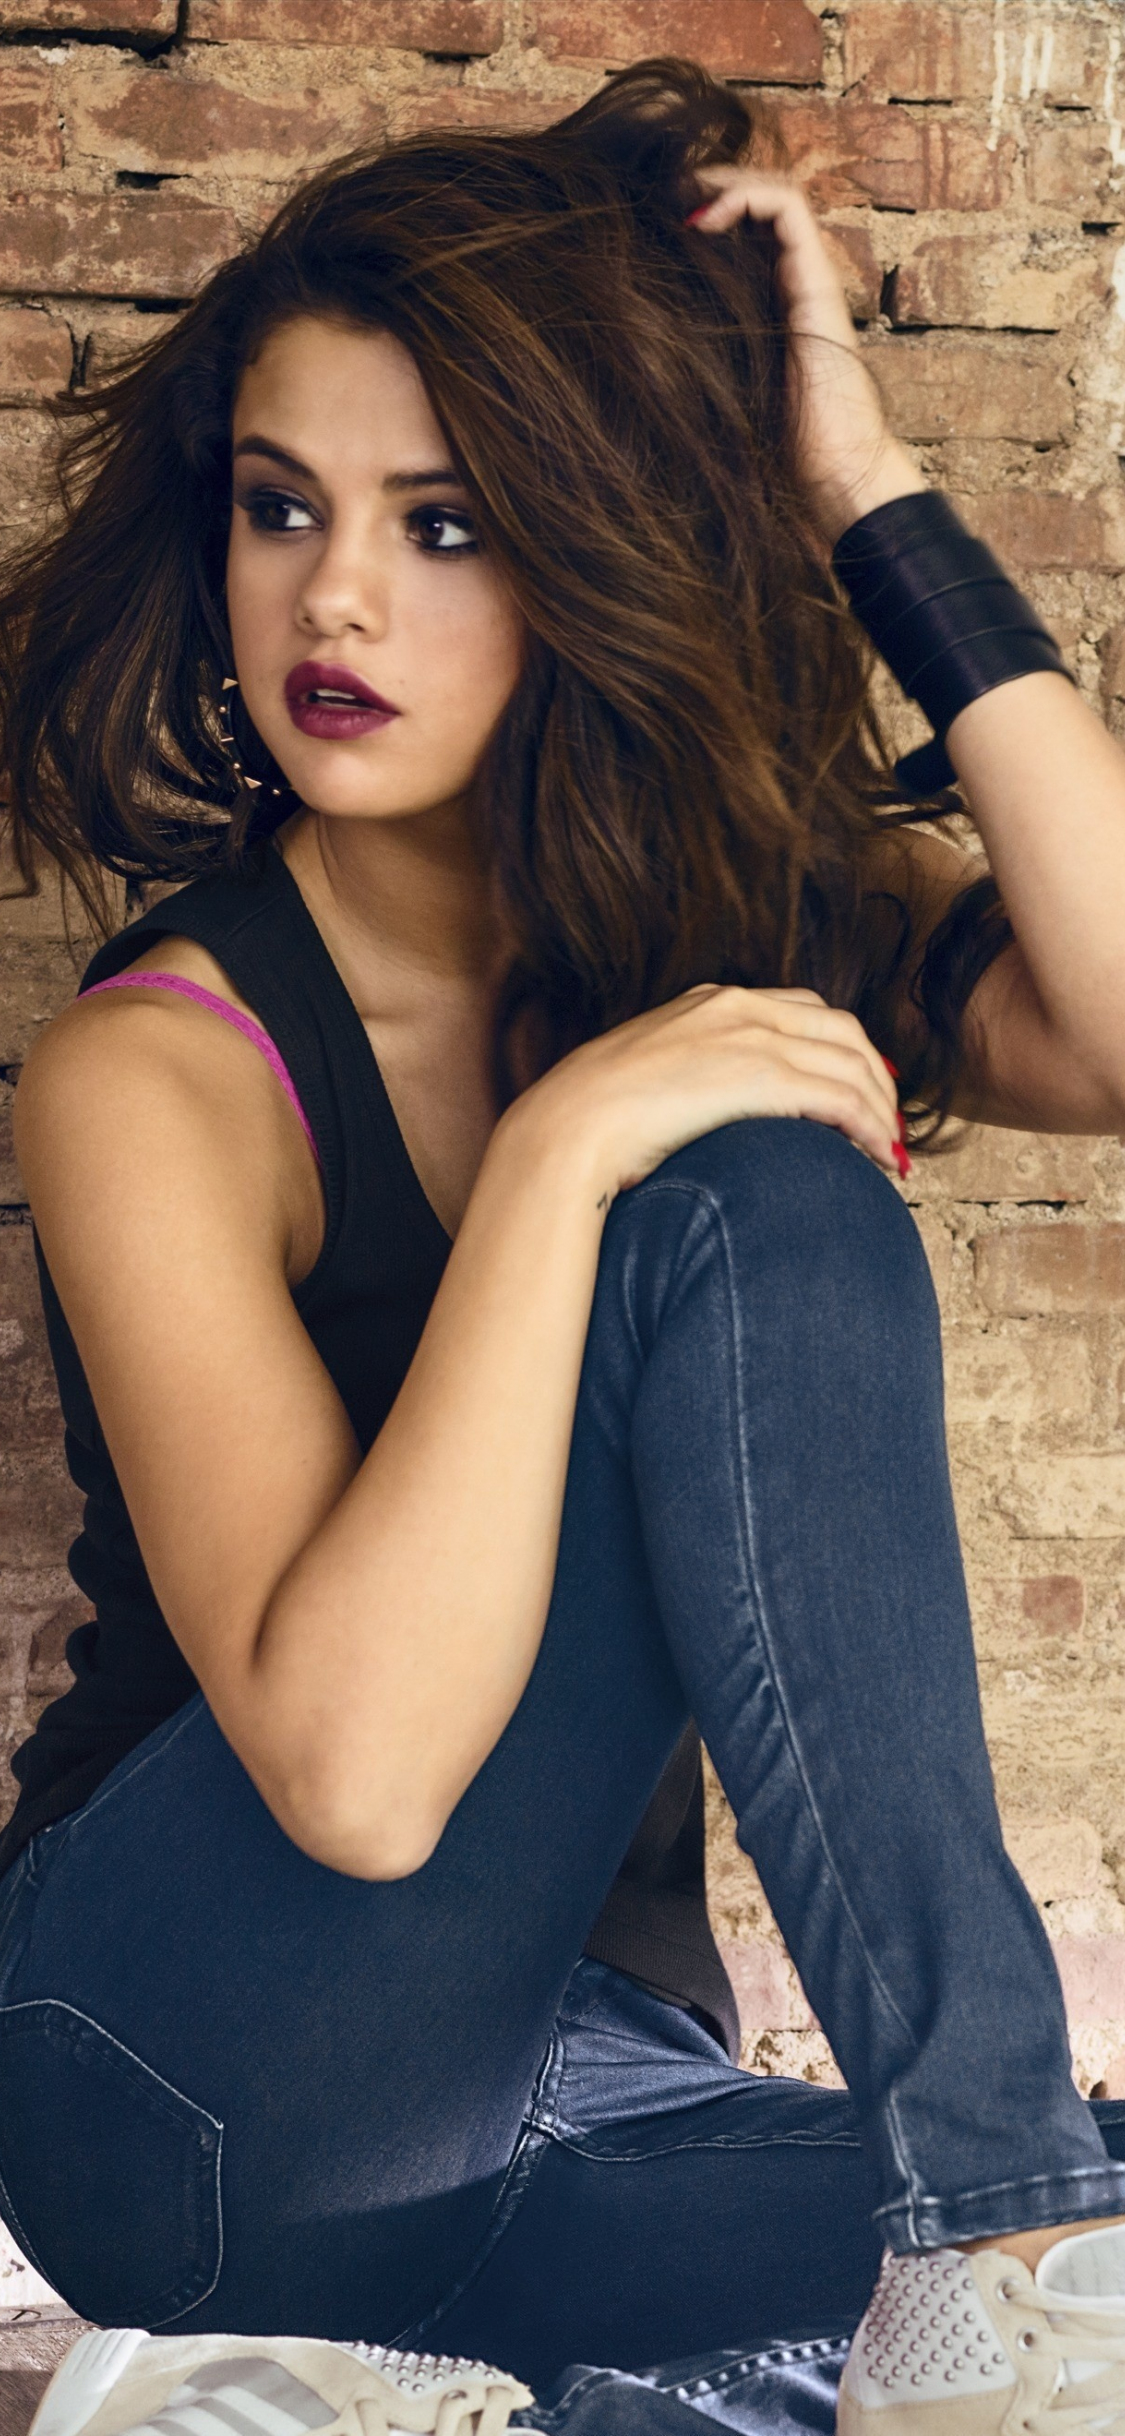 Download 1125x2436 Wallpaper Selena Gomez Blue Jeans Adidas Neo Iphone X 1125x2436 Hd Image Background 5722